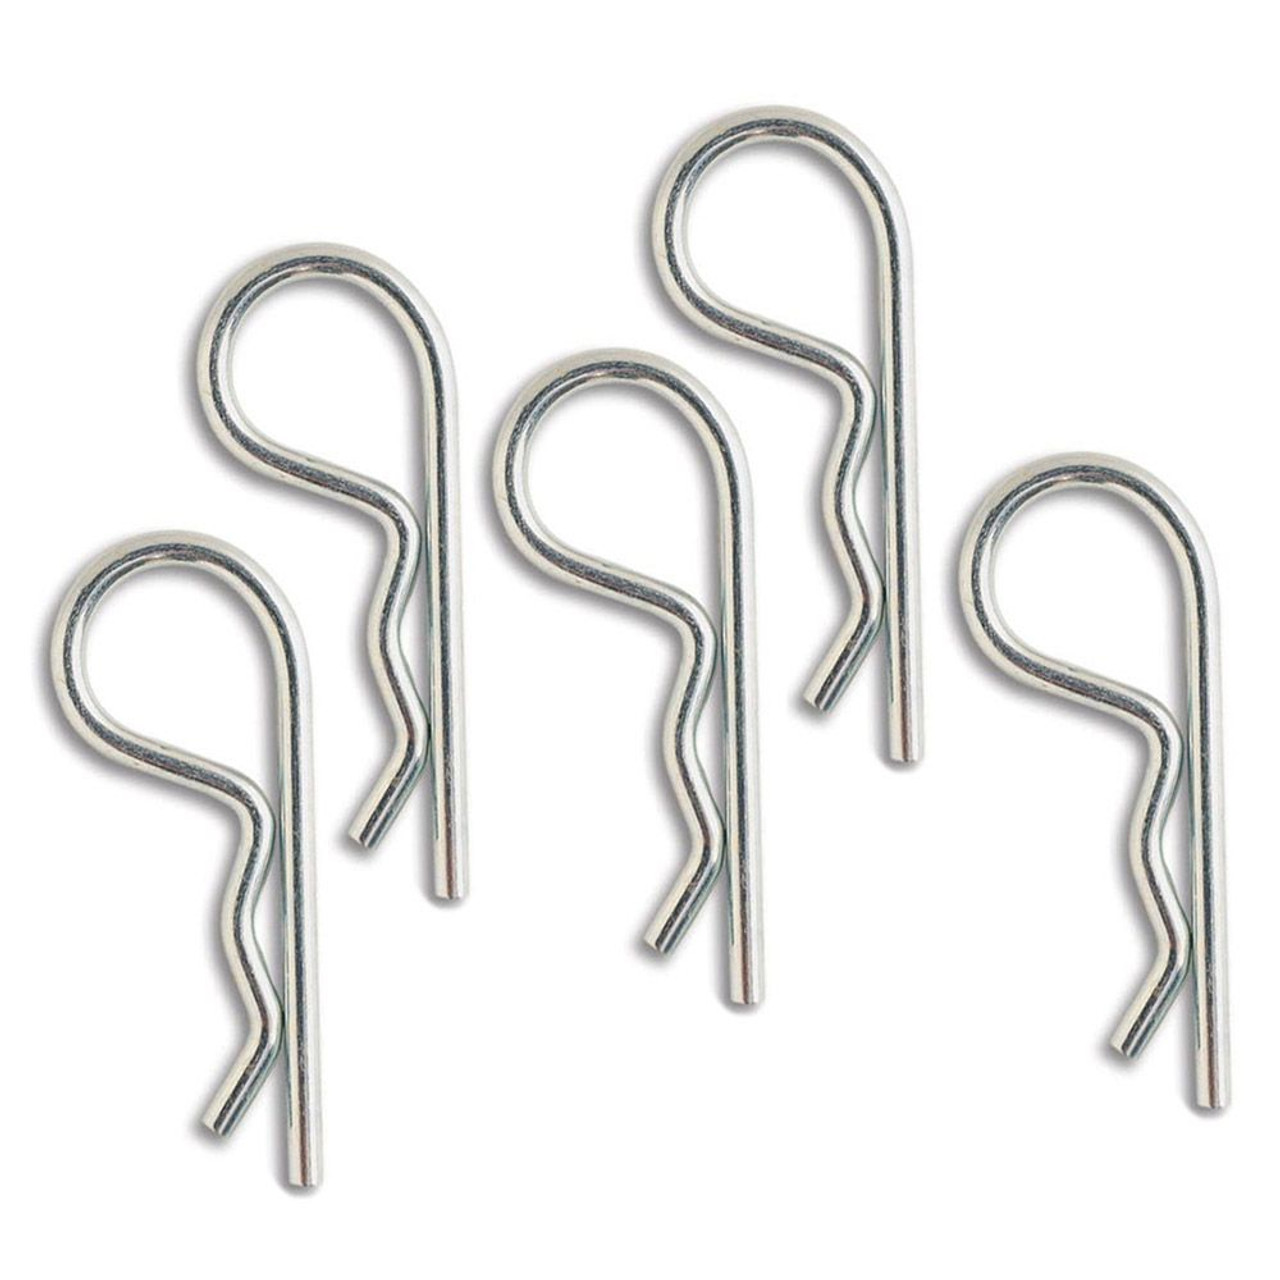 Package of 5 - Hair Pin Clips For Heavy-Duty Extinguisher Brackets